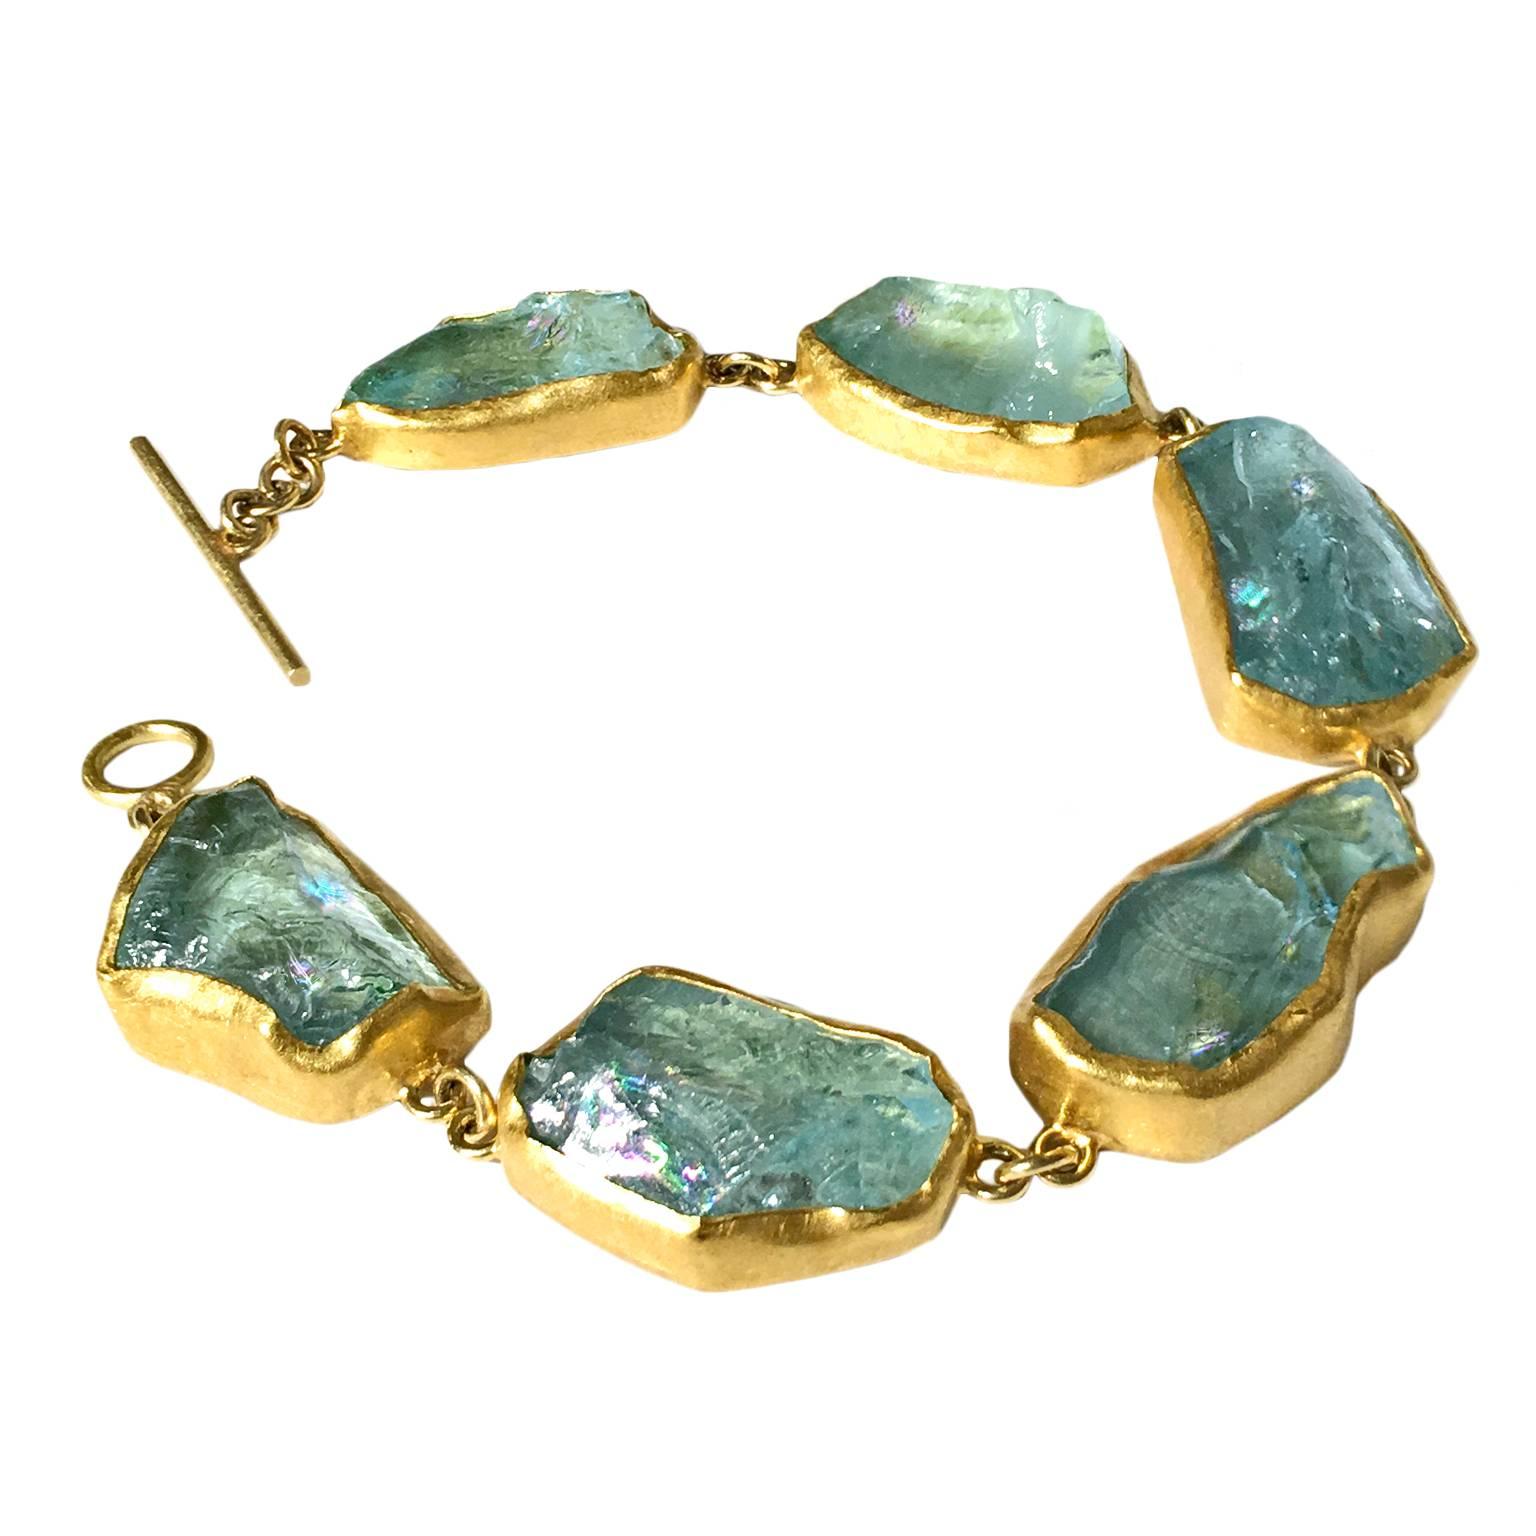 One-of-a-Kind Bracelet with five aquamarine crystals (90 carats) showcasing beautiful rainbow flashes, bezel-set in handcrafted 22k yellow gold with an 18k yellow gold toggle clasp. 